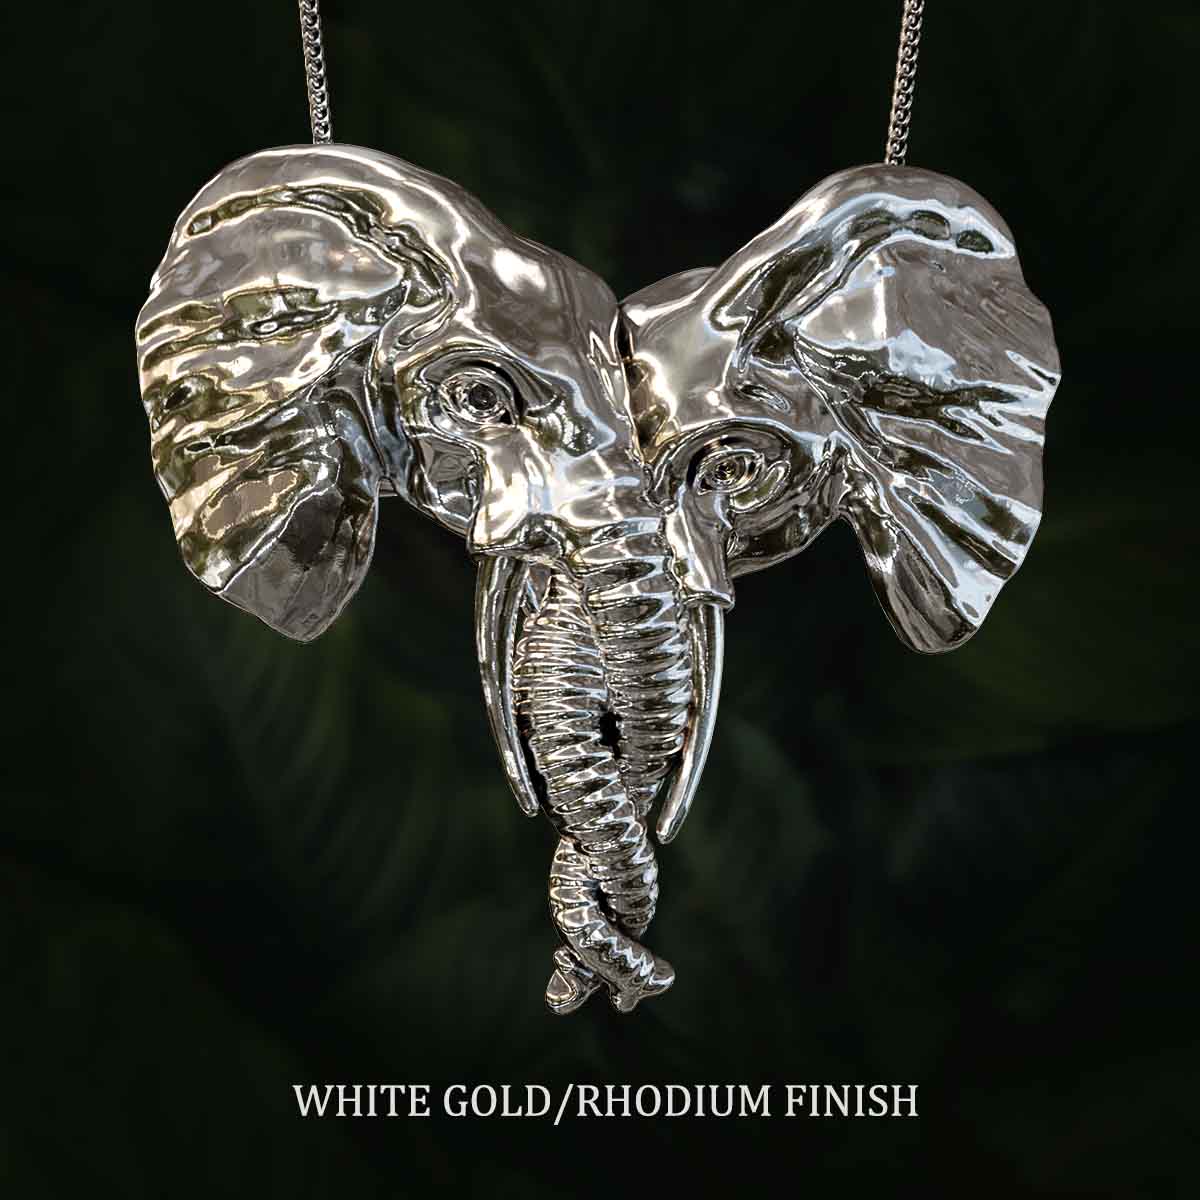 White-Gold-Rhodium-Finish-Elephant-Heads-with-Trunks-Entwined-Pendant-Jewelry-For-Necklace